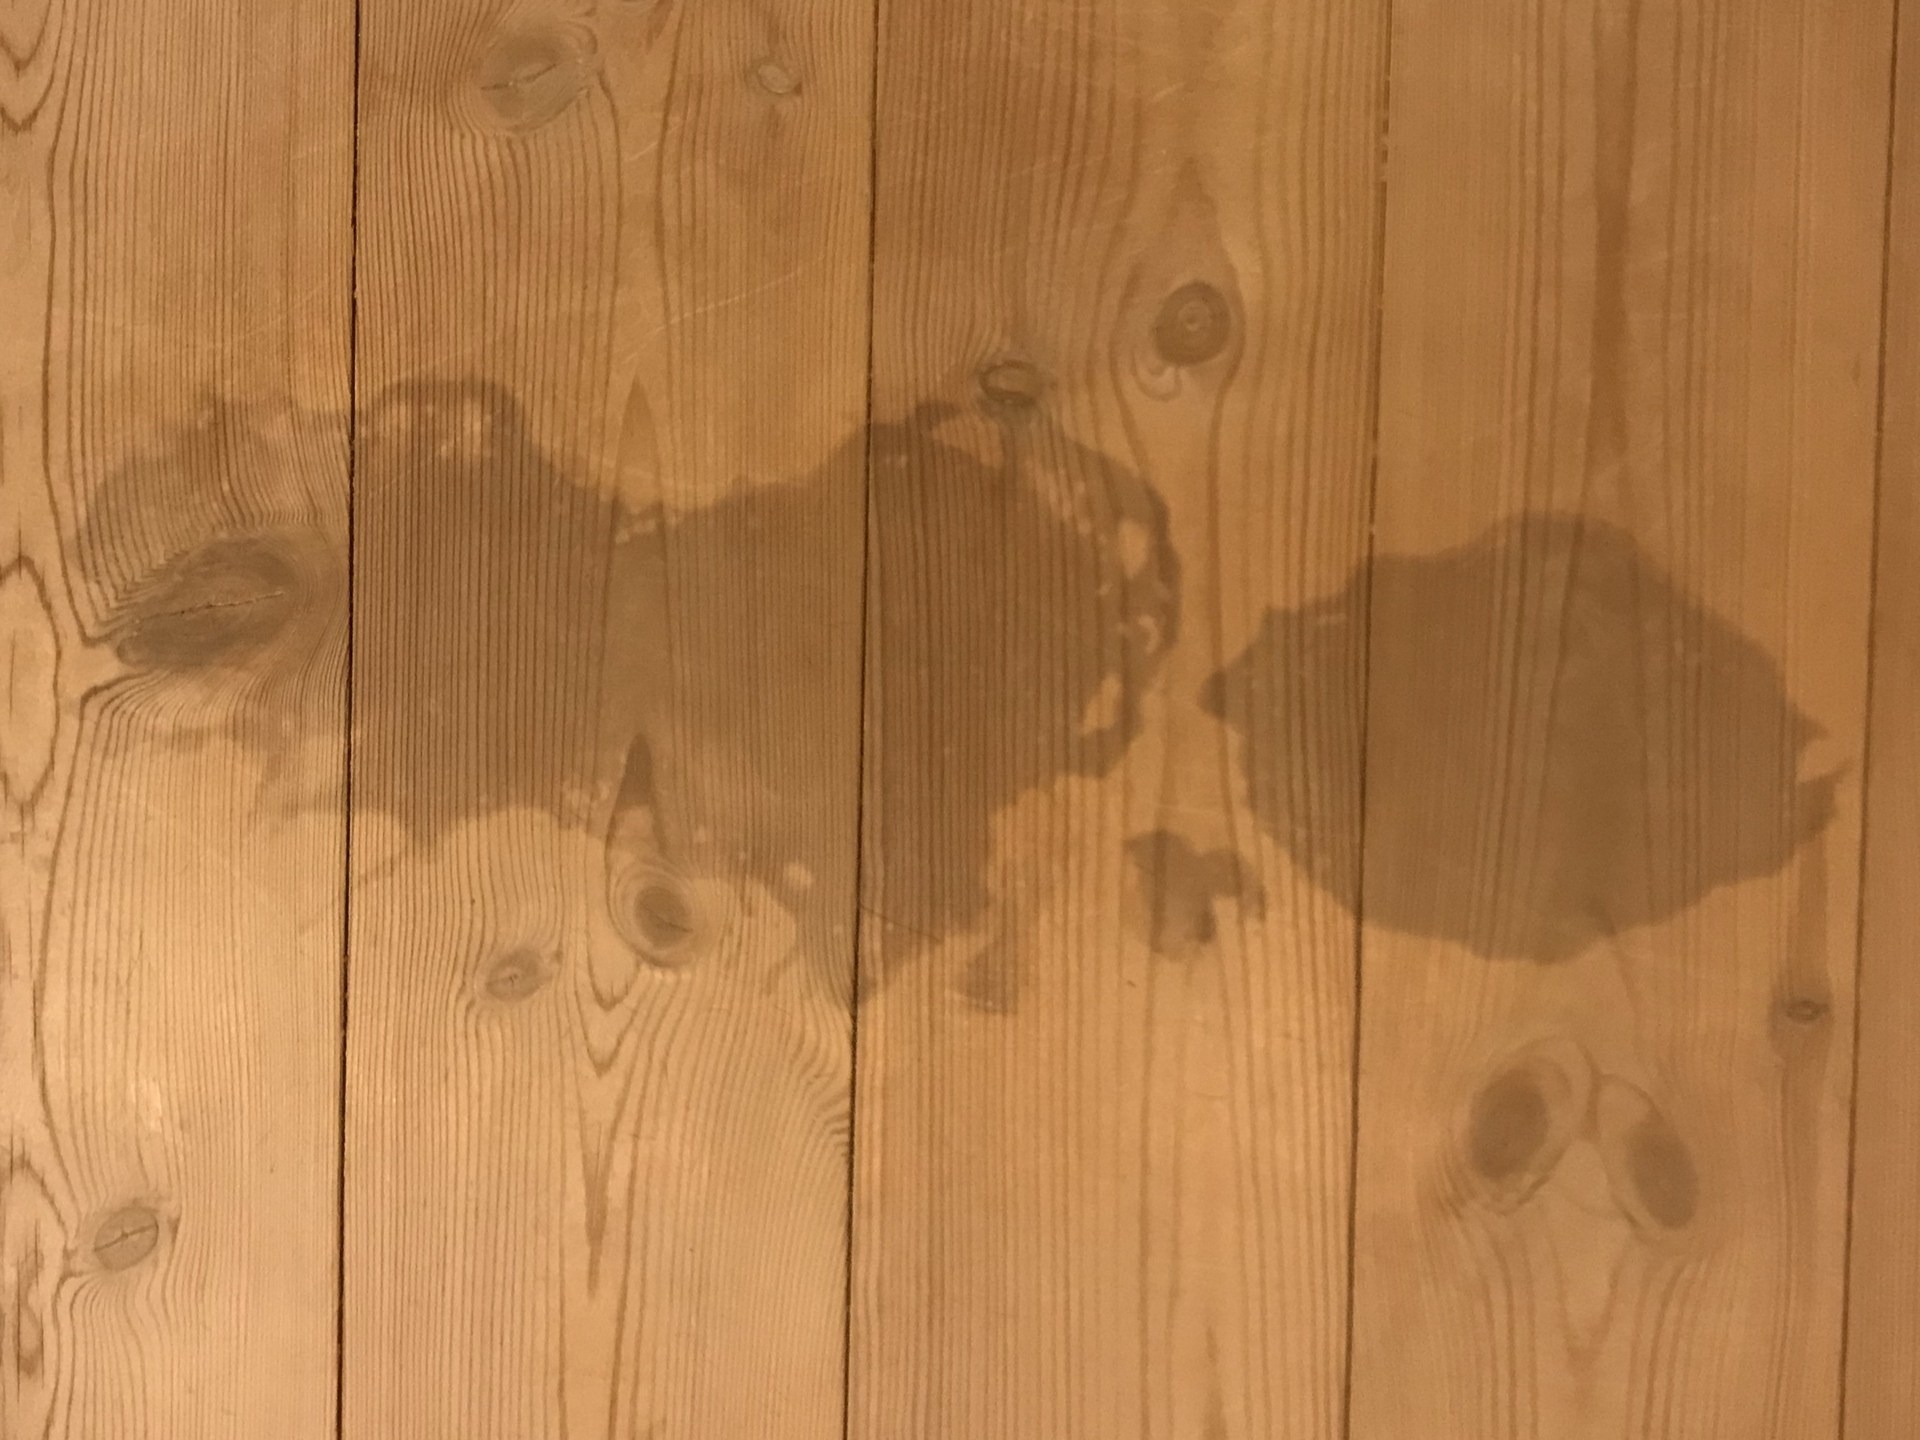 How To Get Dog Poop Stain Out Of Wood Floor